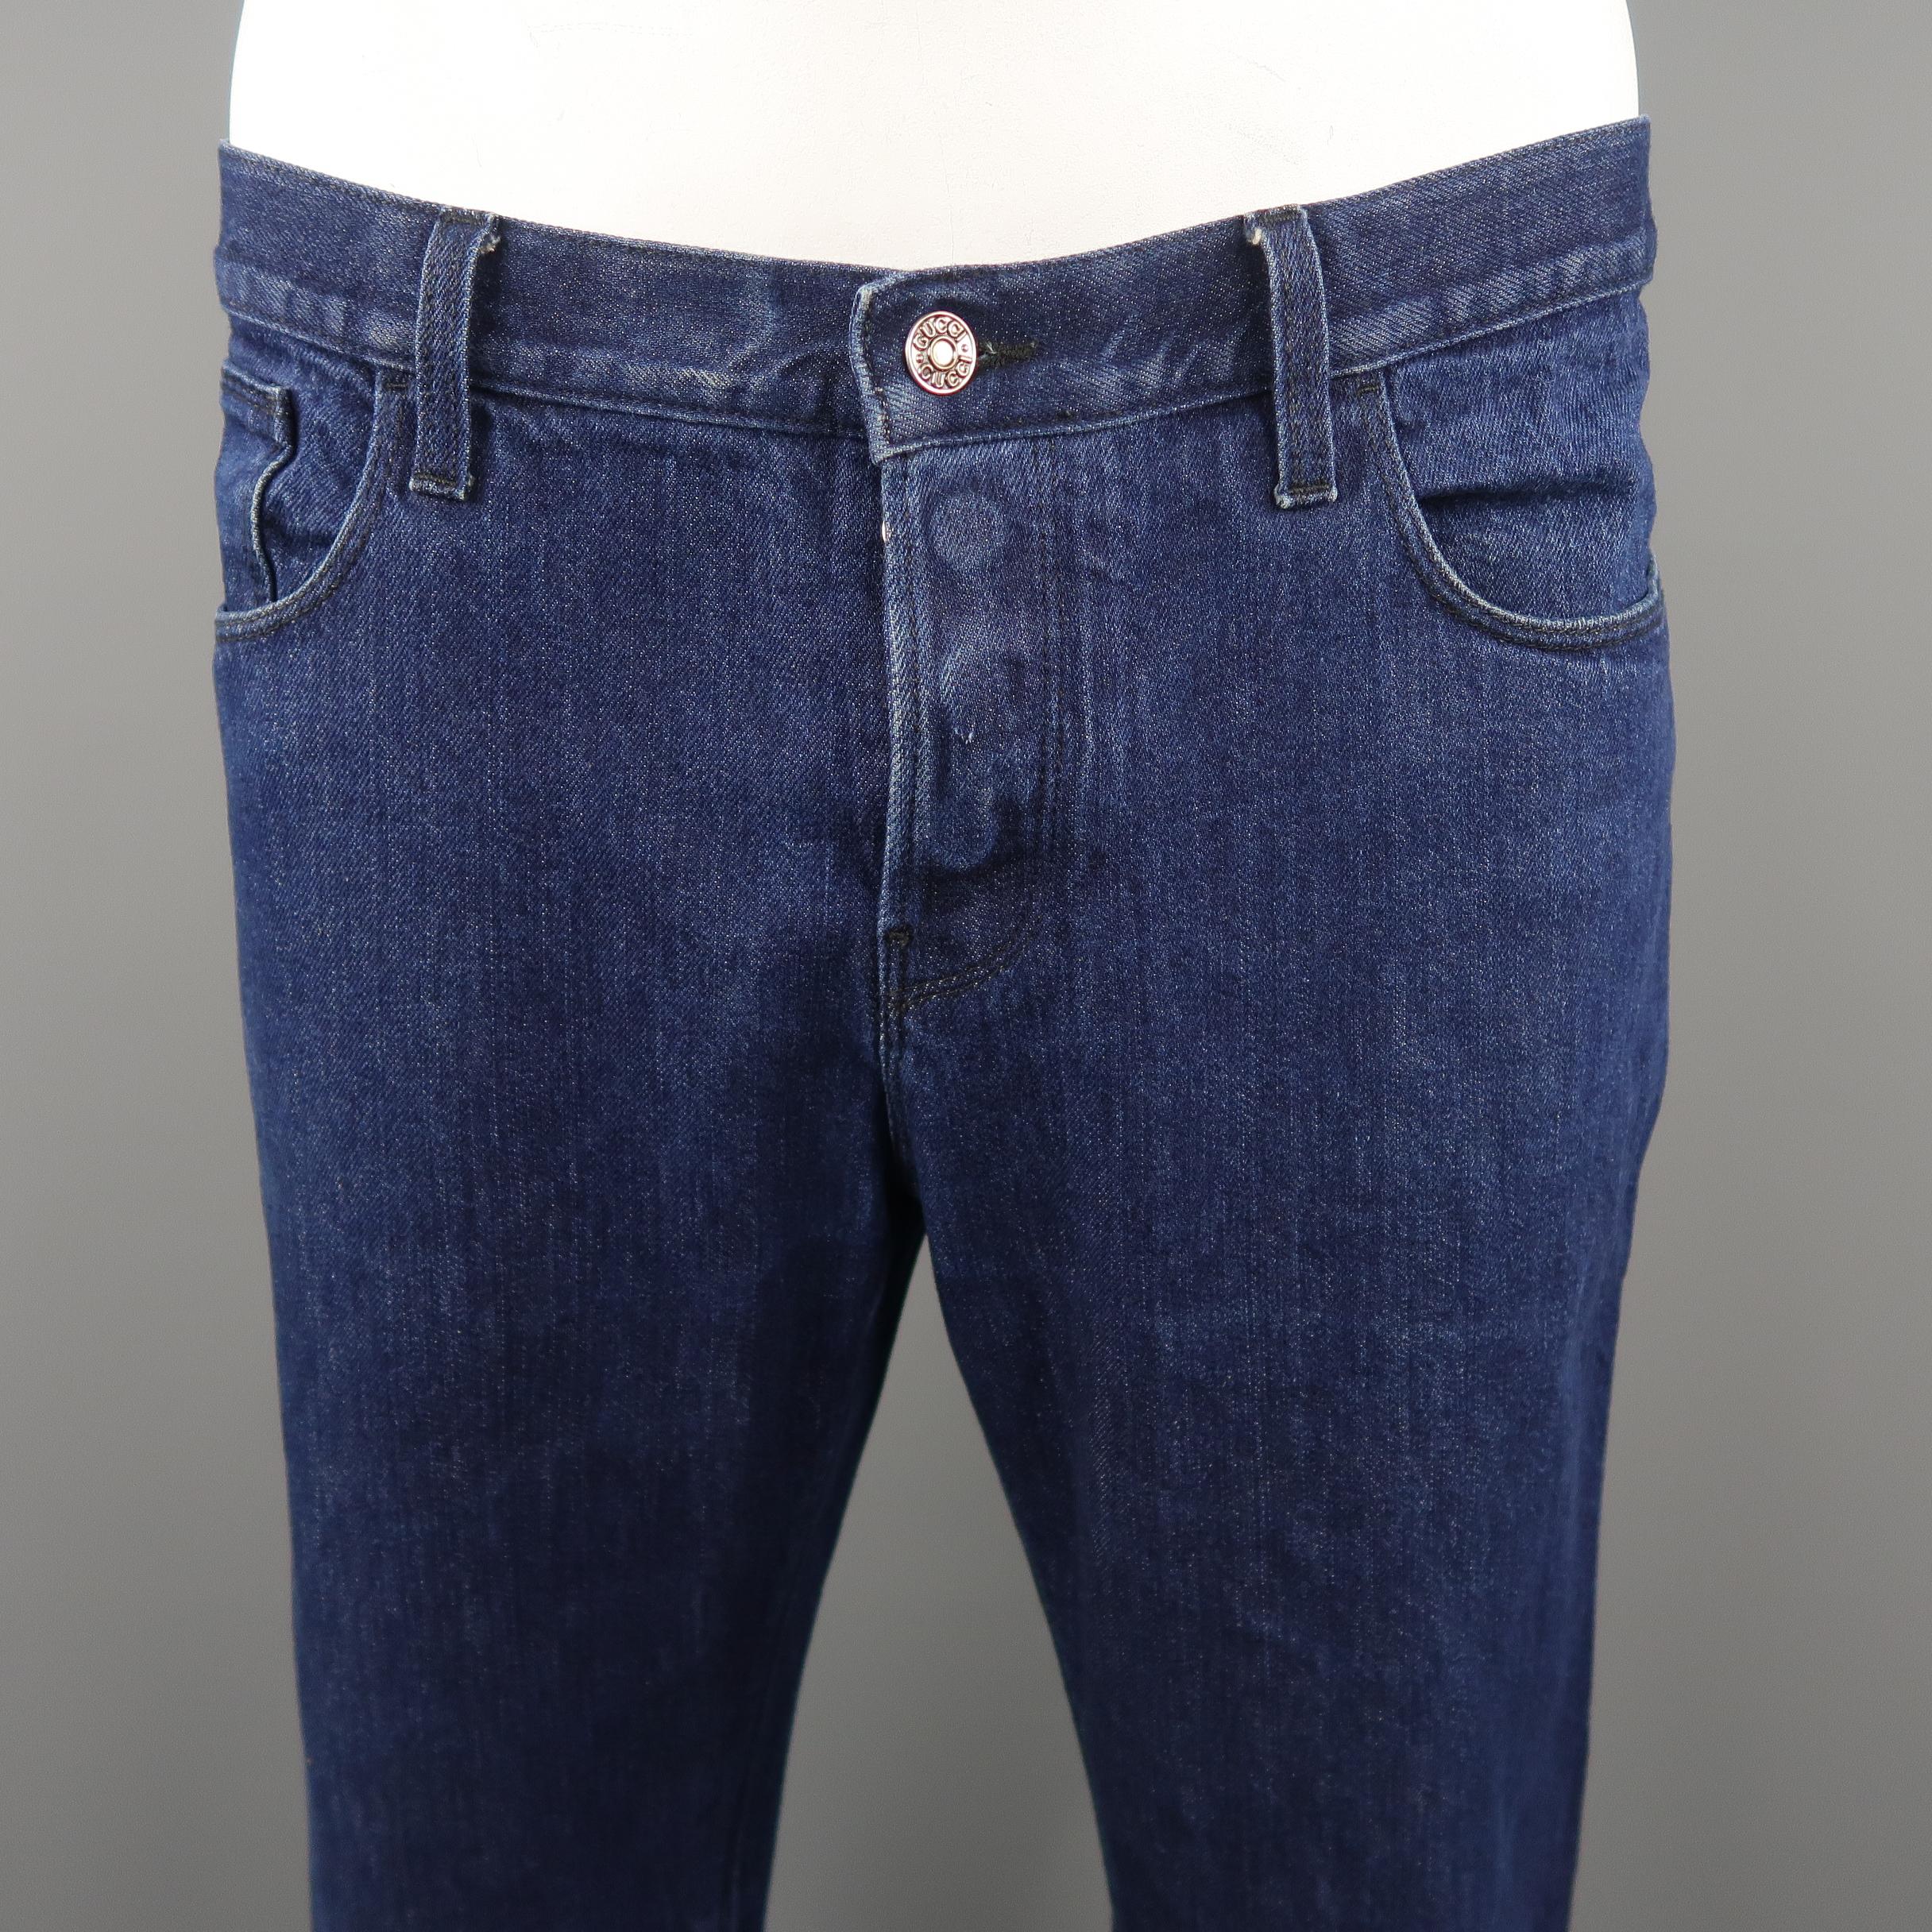 GUCCI jeans come in indigo solid denim material, button fly which feature a black logo on the back pocket. Very light signs of wear throughout. 
Made in Italy.
 
Excellent  Pre-Owned Condition.
Marked: 54 IT
 
Measurements:
 
Waist:  38  in.
Rise: